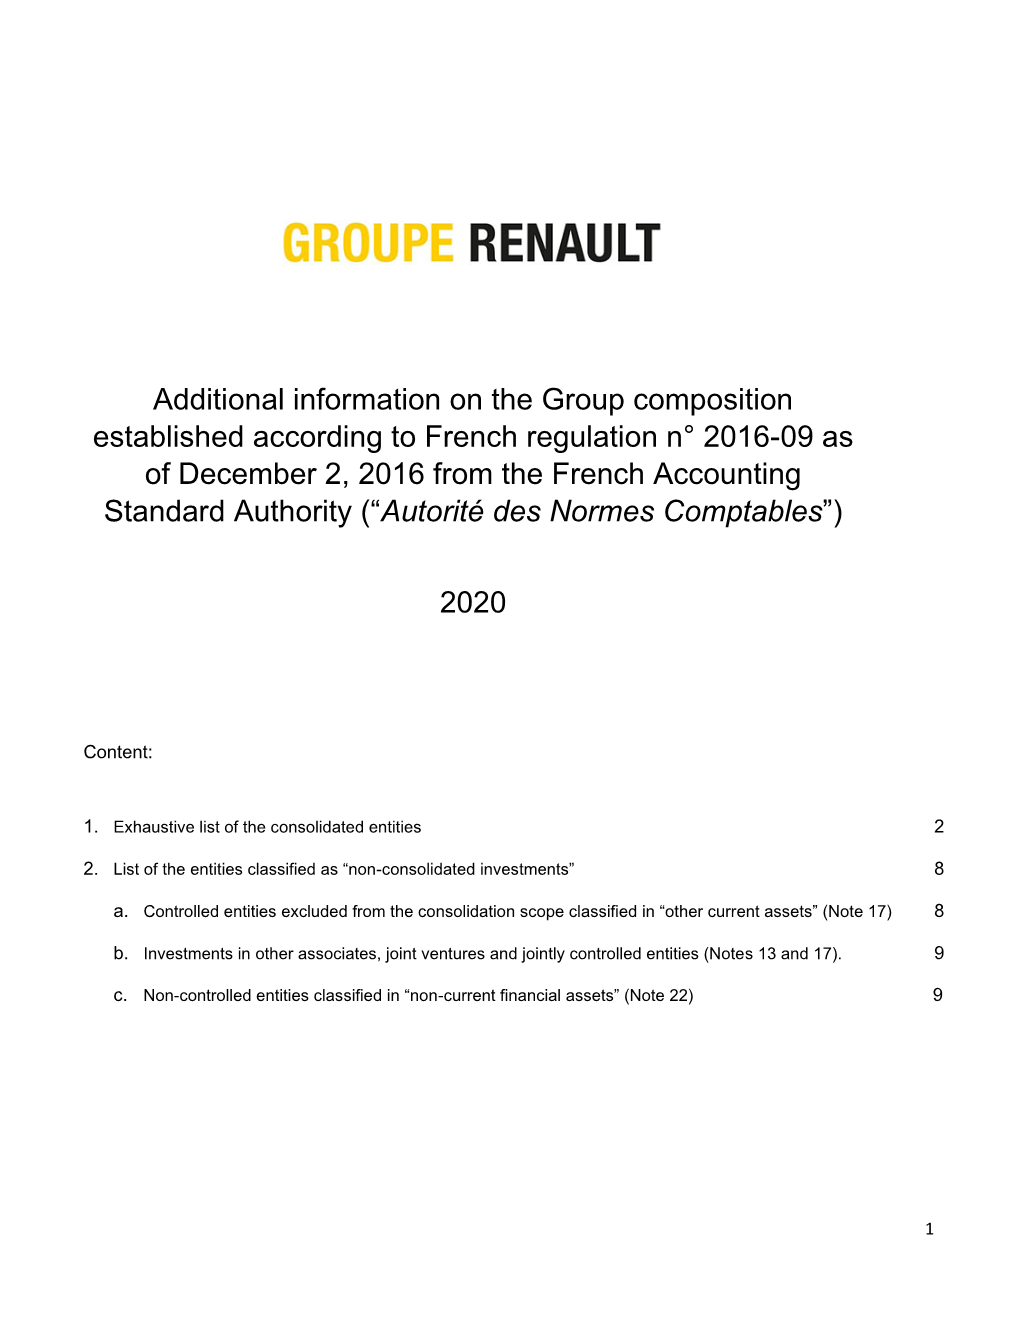 Additional Information on the Renault Group